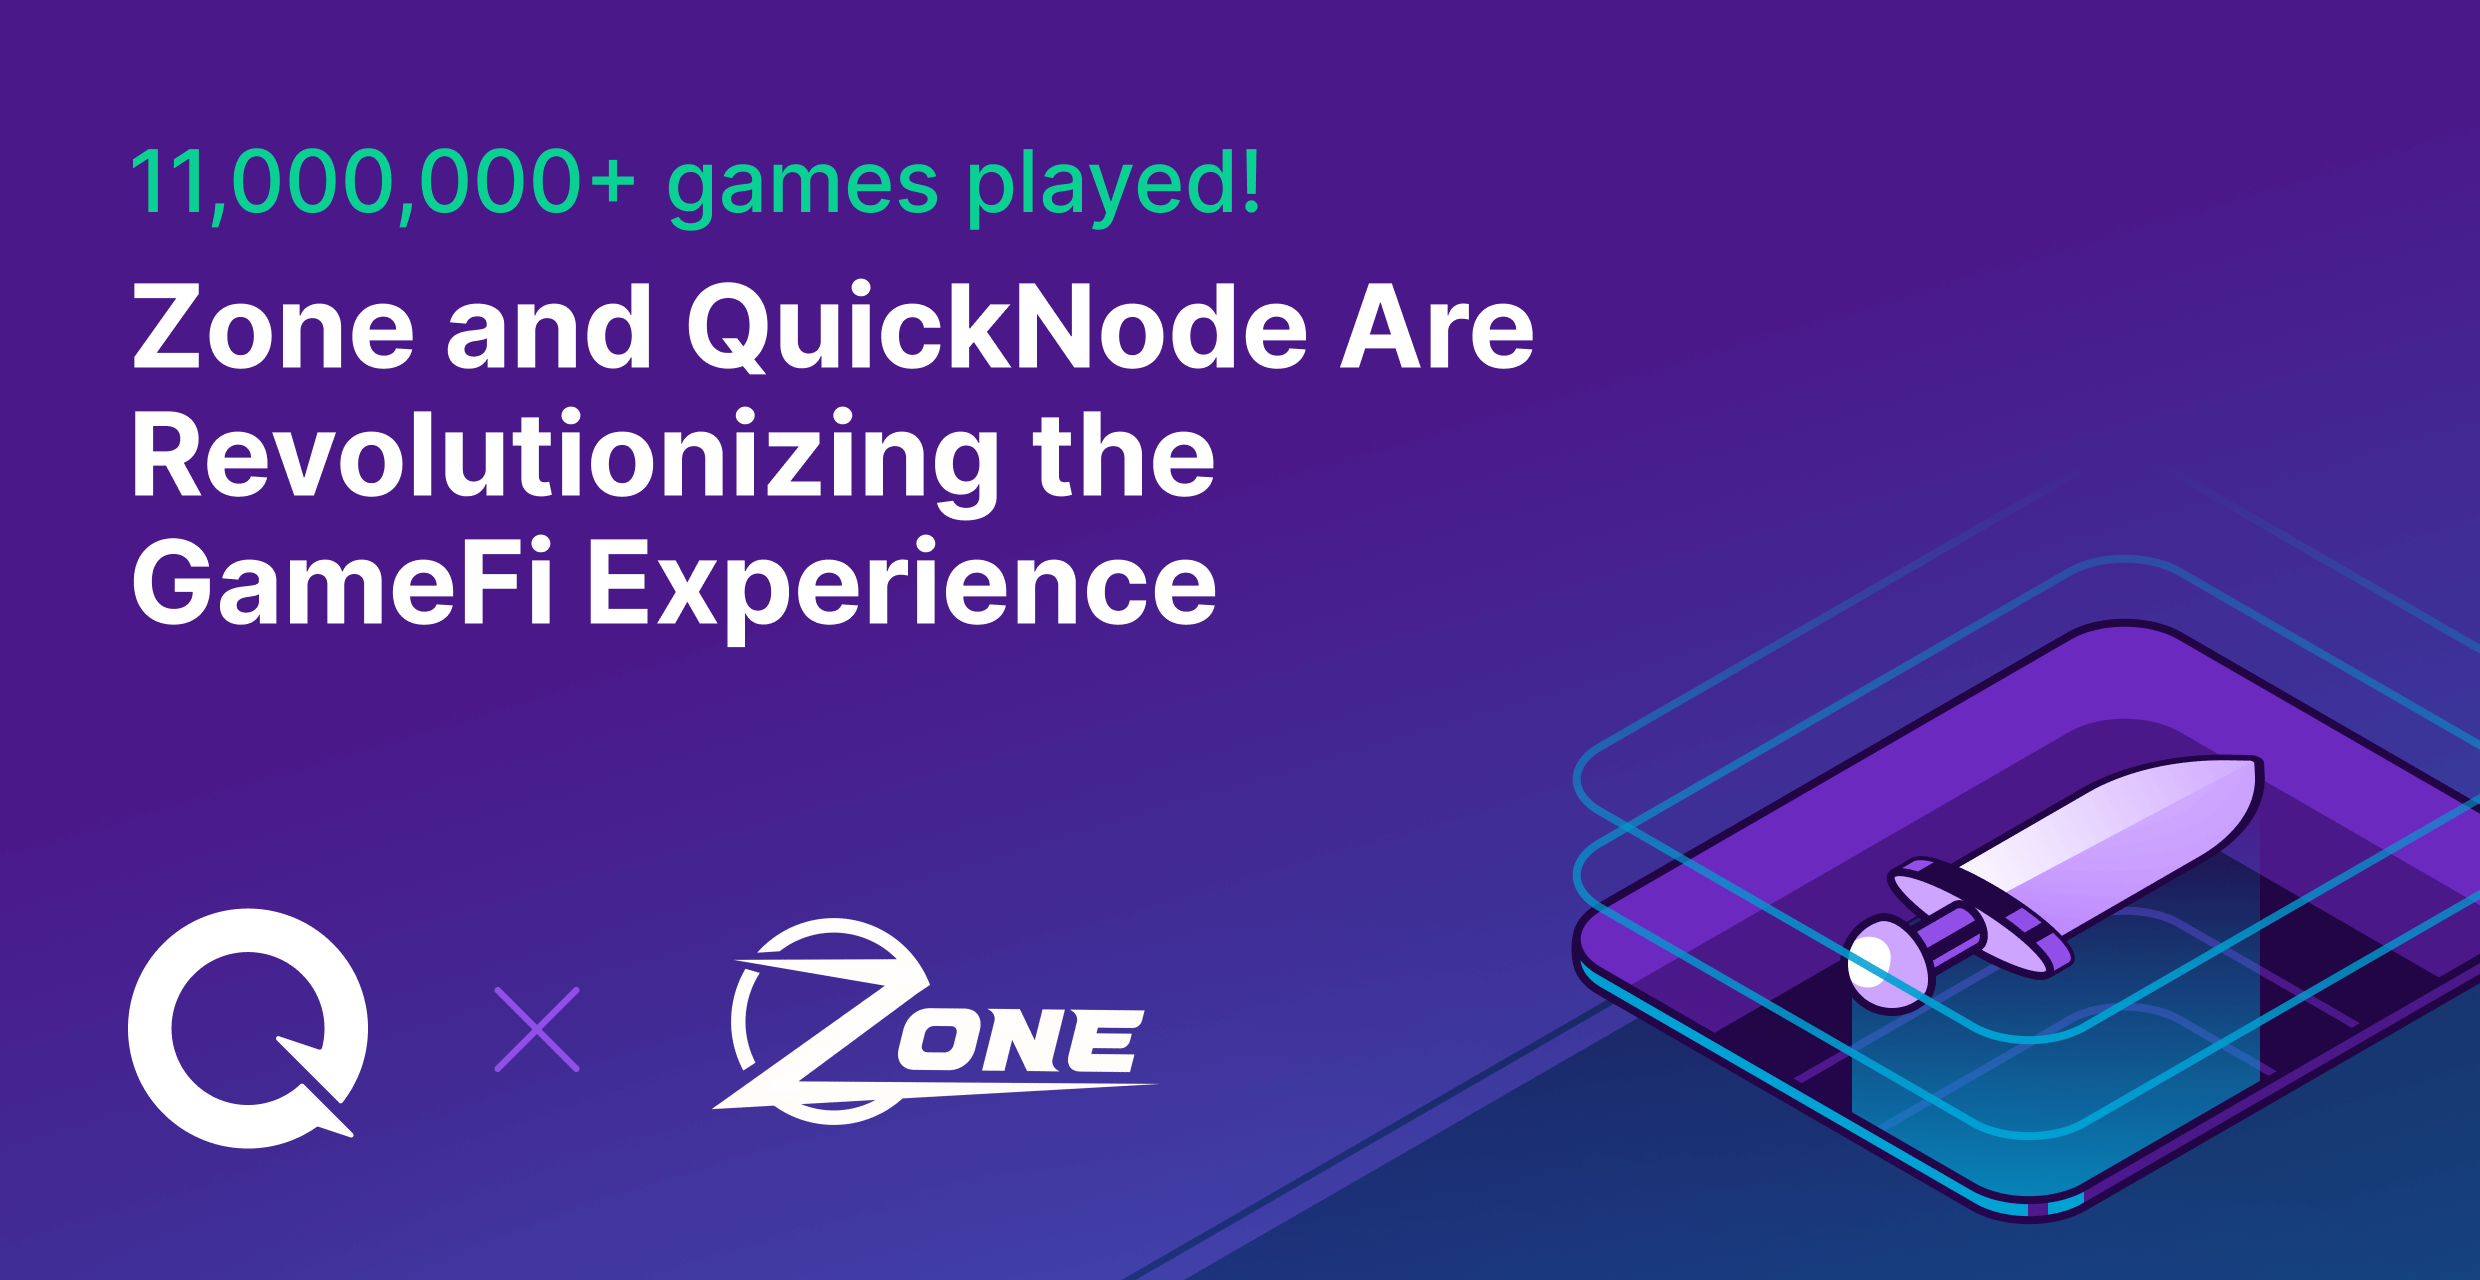 Zone and QuickNode Are Revolutionizing the GameFi Experience With Over 11,000,000 Games Played